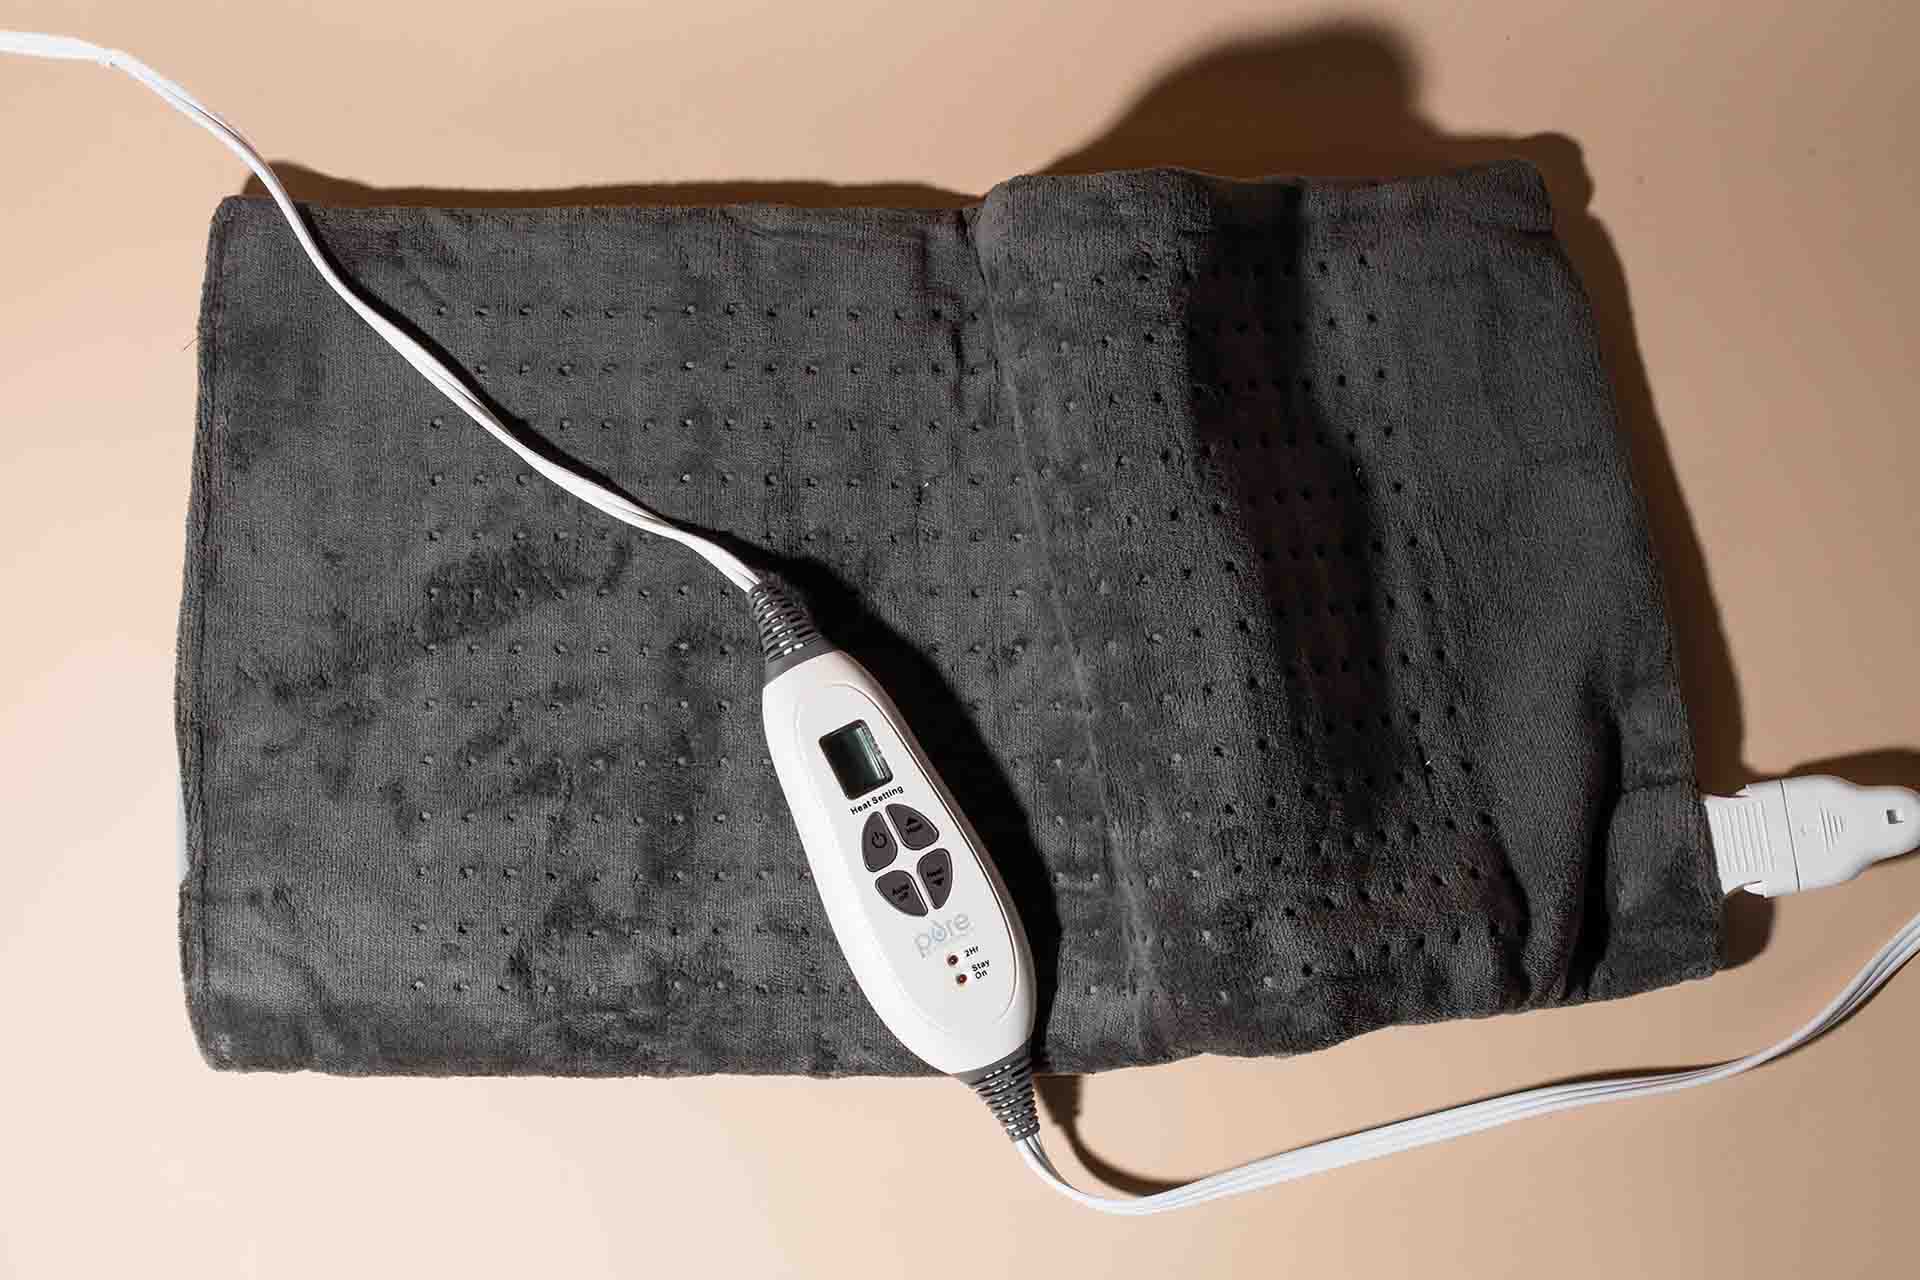 Is using a heating pad good for you?